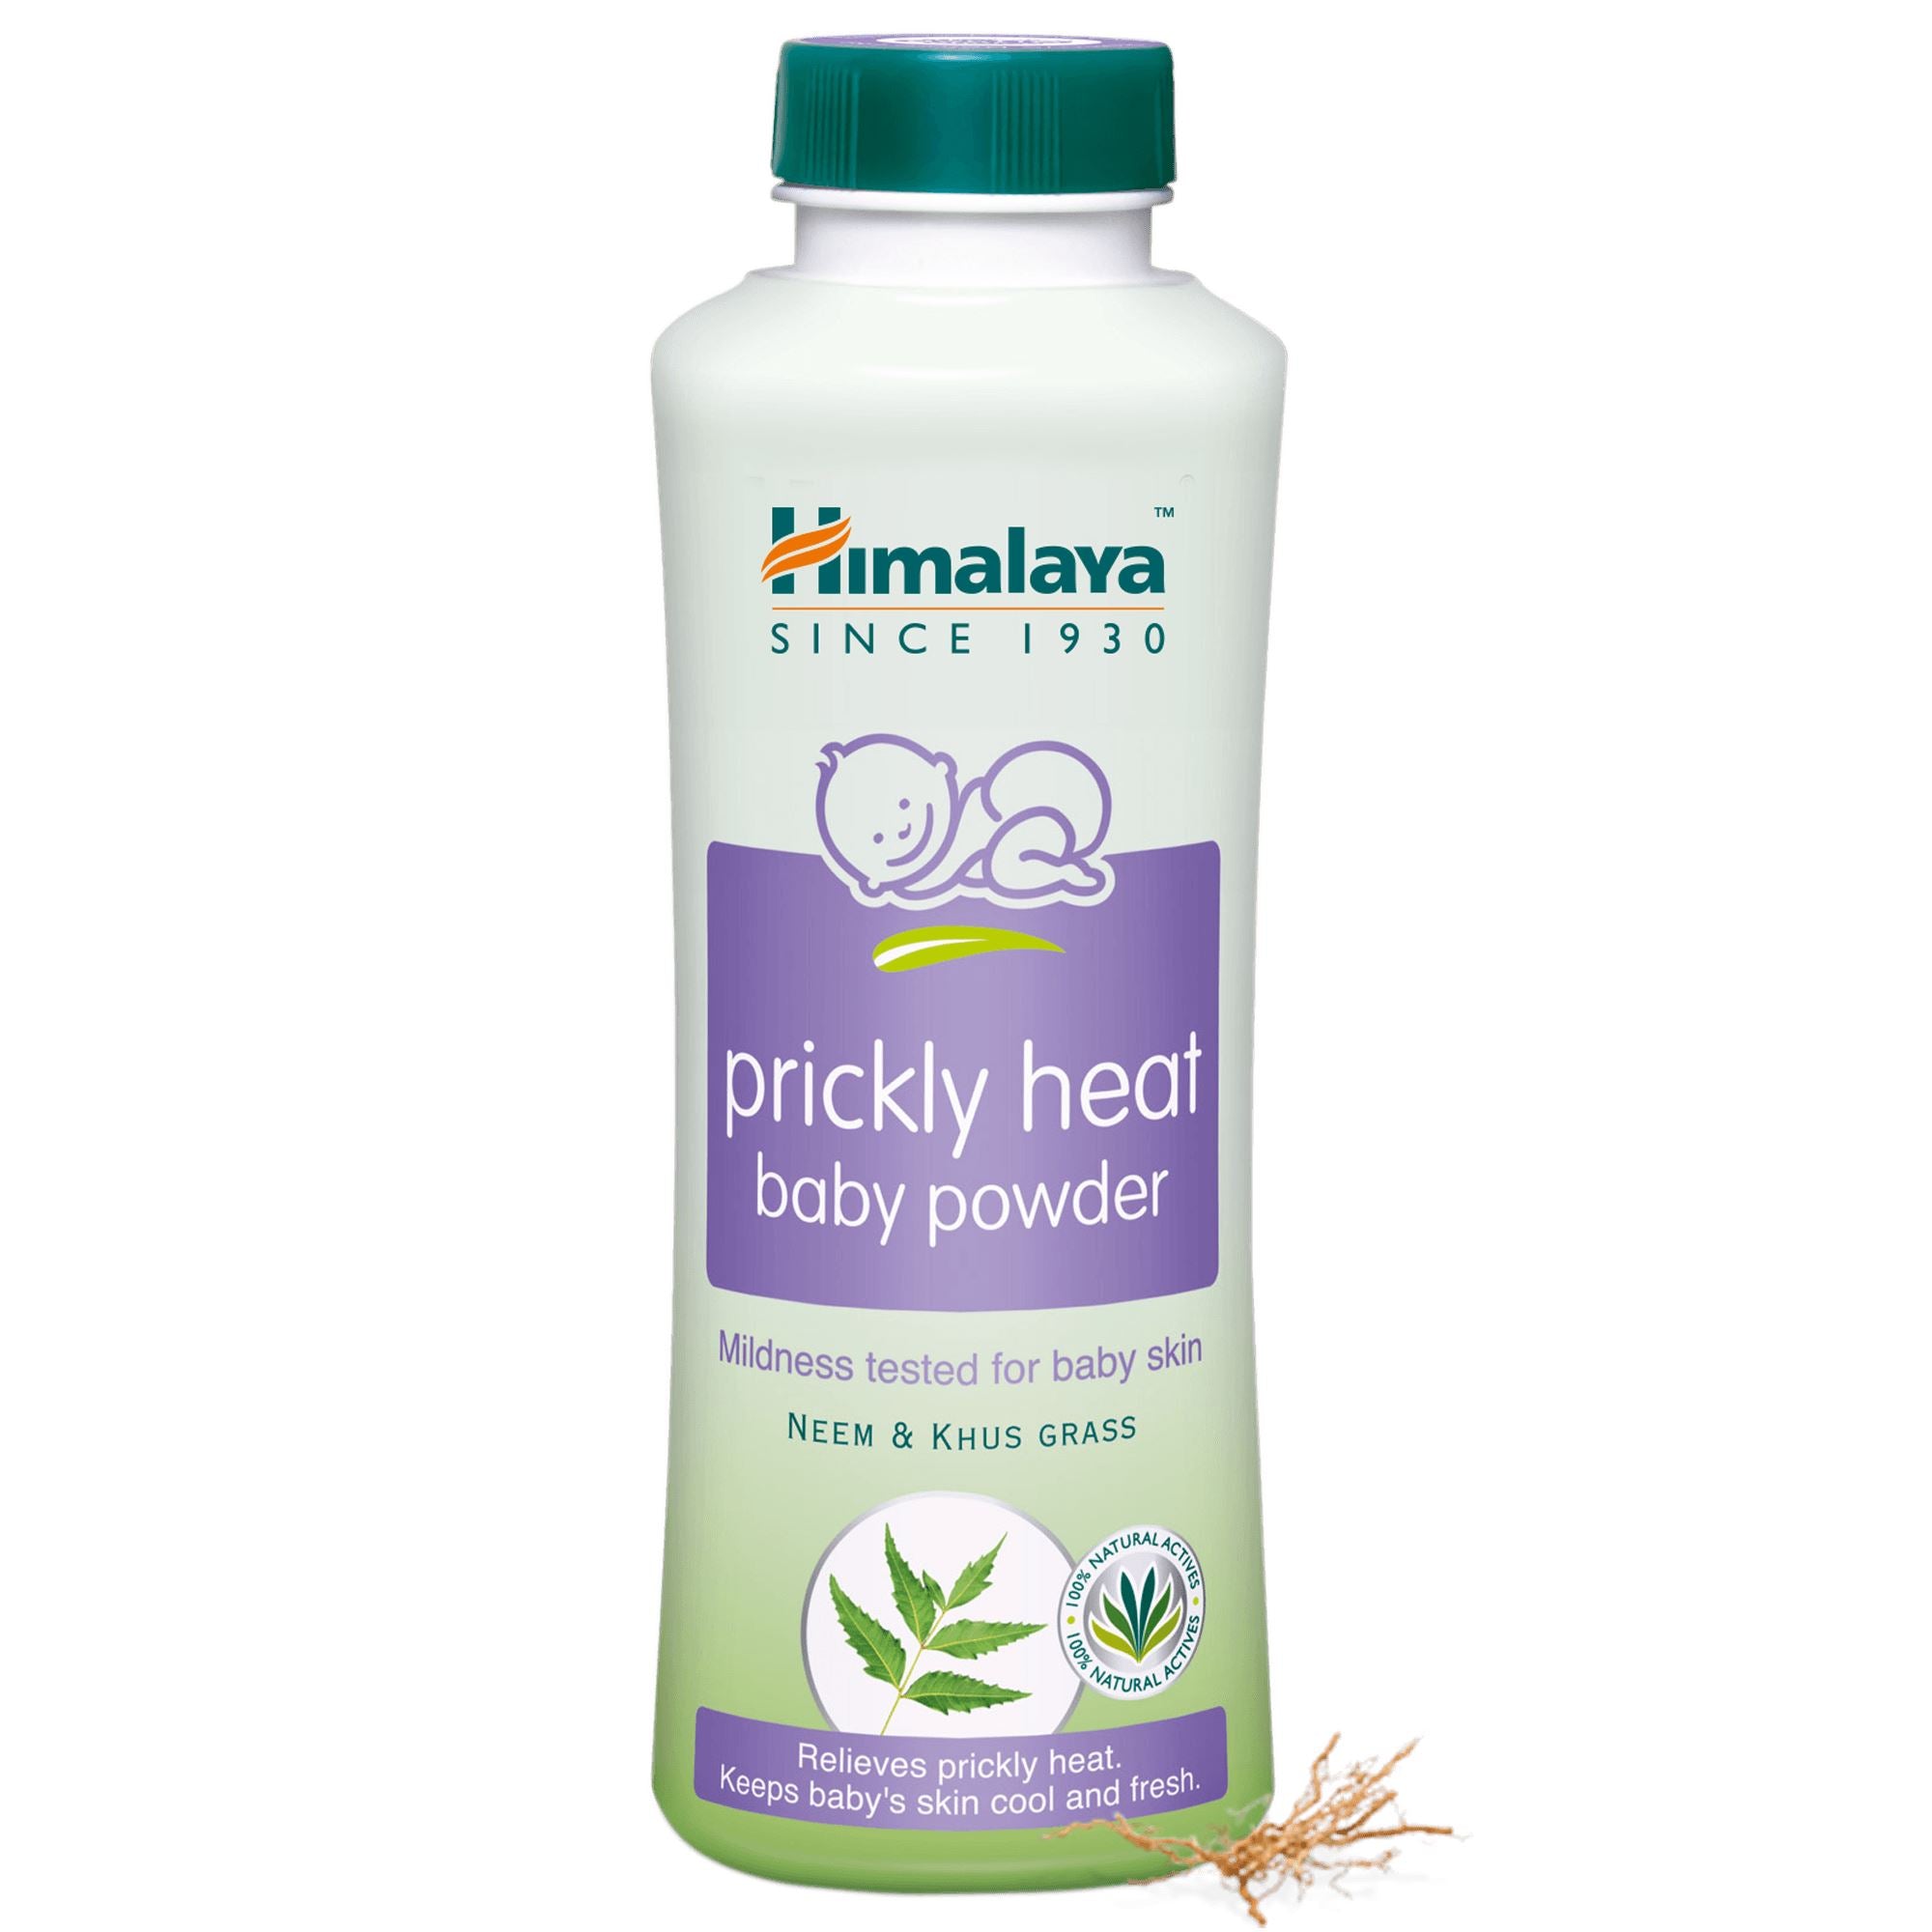 Himalaya prickly heat baby powder - Provides relief from prickly heat and keeps baby fresh